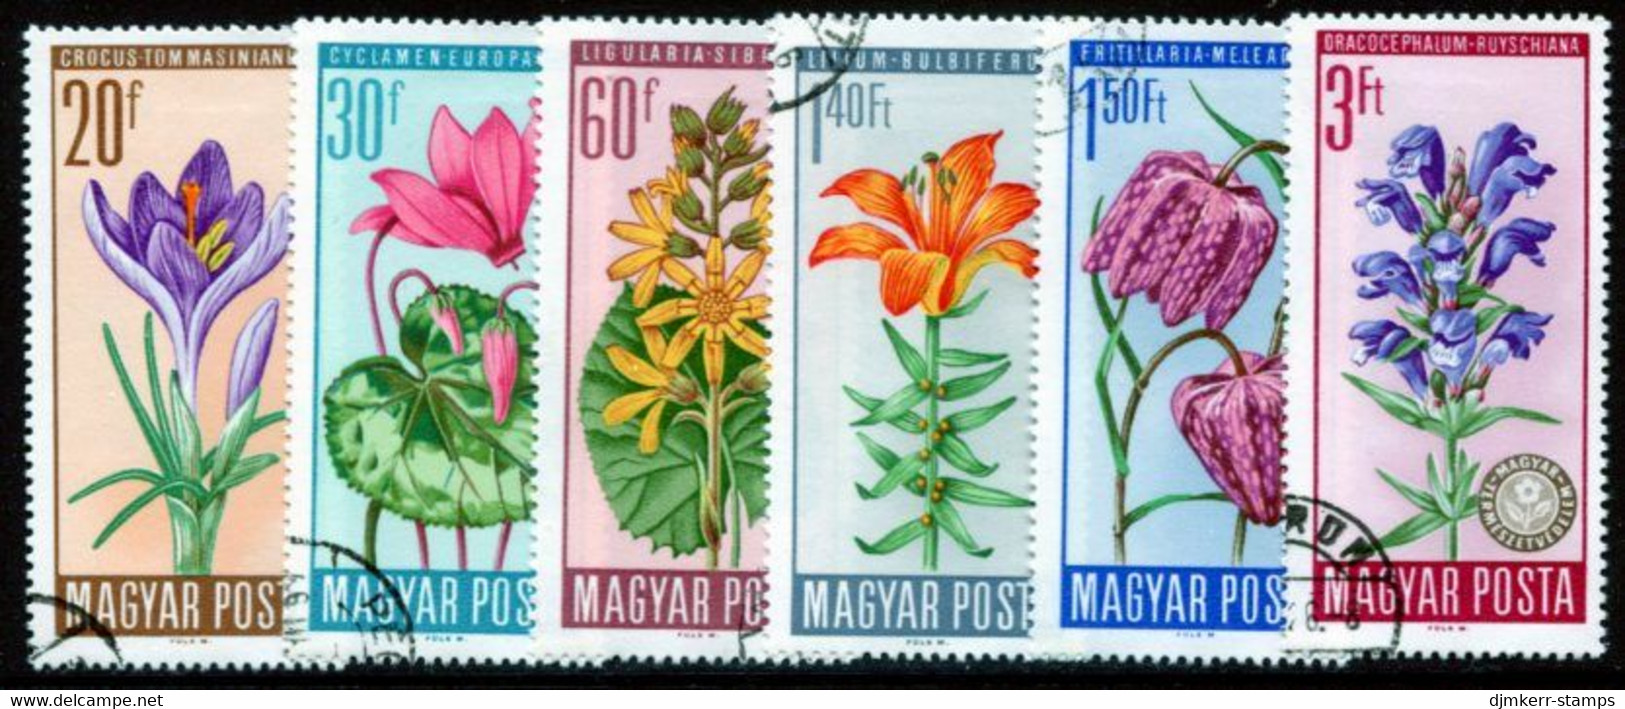 HUNGARY 1966 Protected Flowers Used.  Michel 2212-17 - Usati